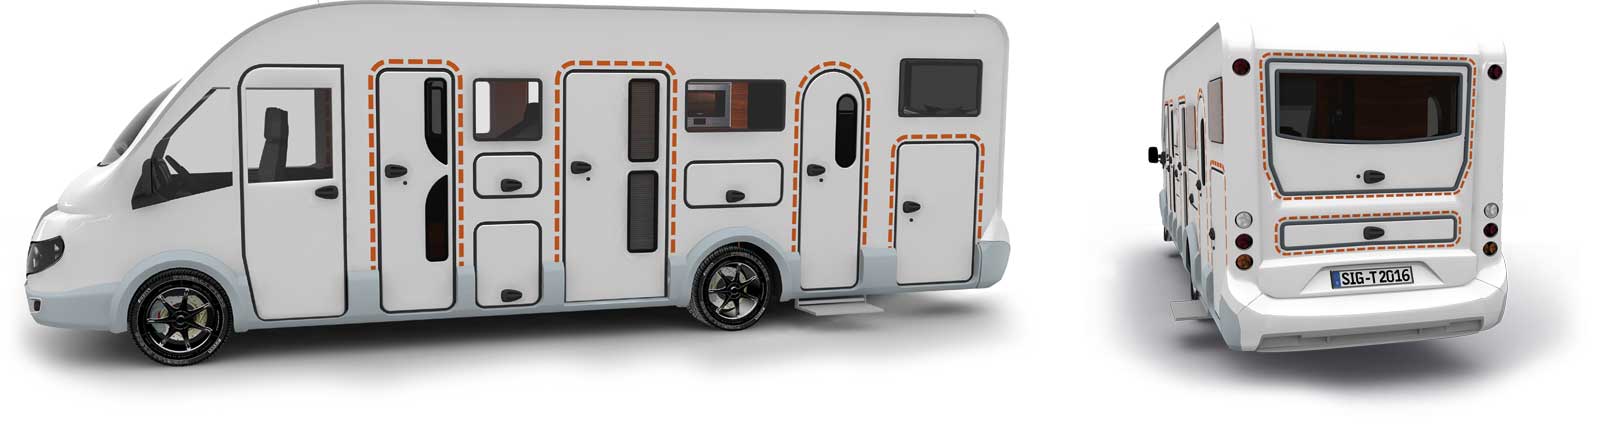 Satisfied tegos customers with bwheelchair-accessible caravans and RVs